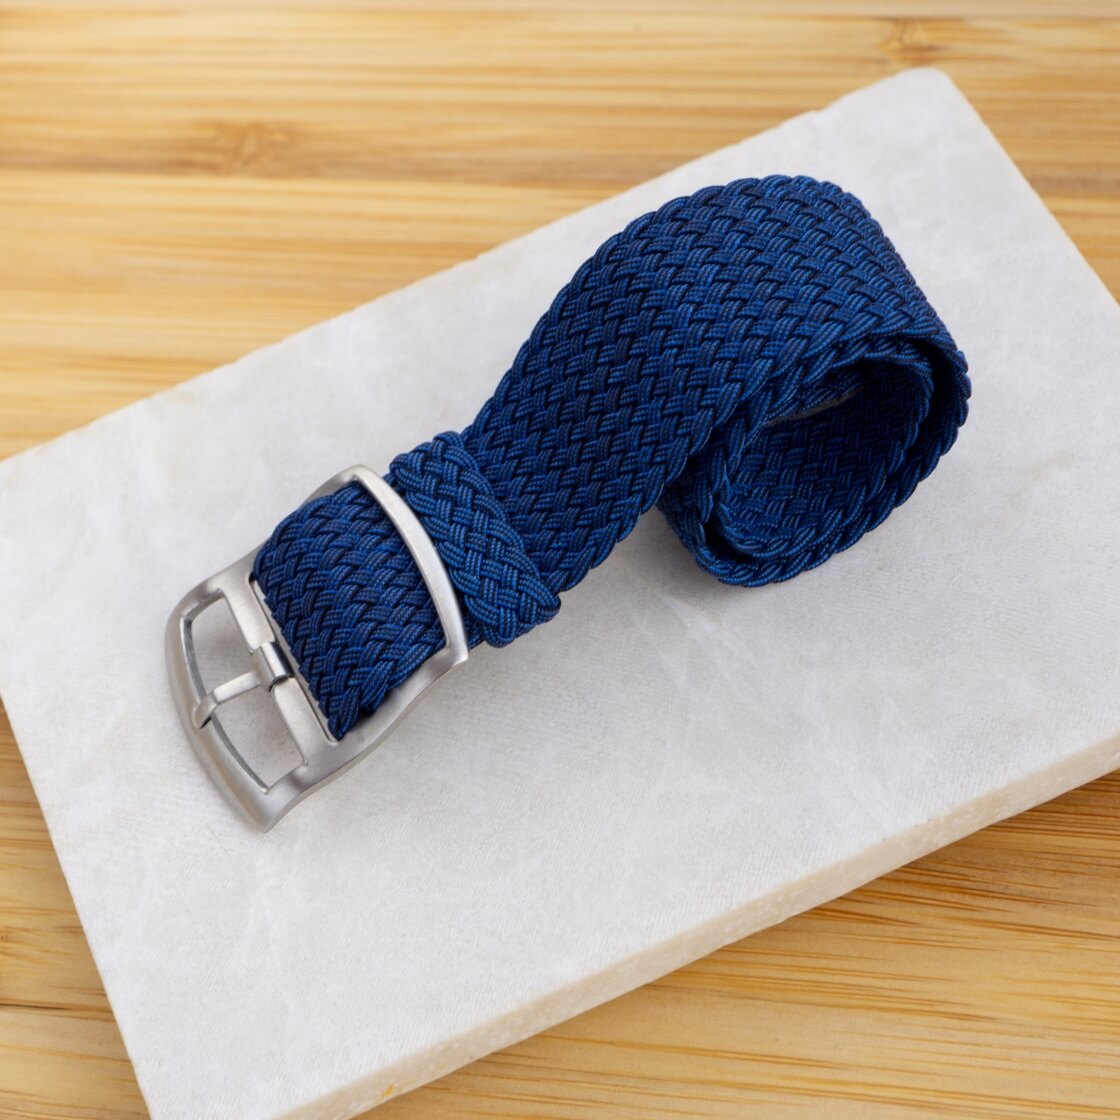 Perlon strap by Crown and Buckle